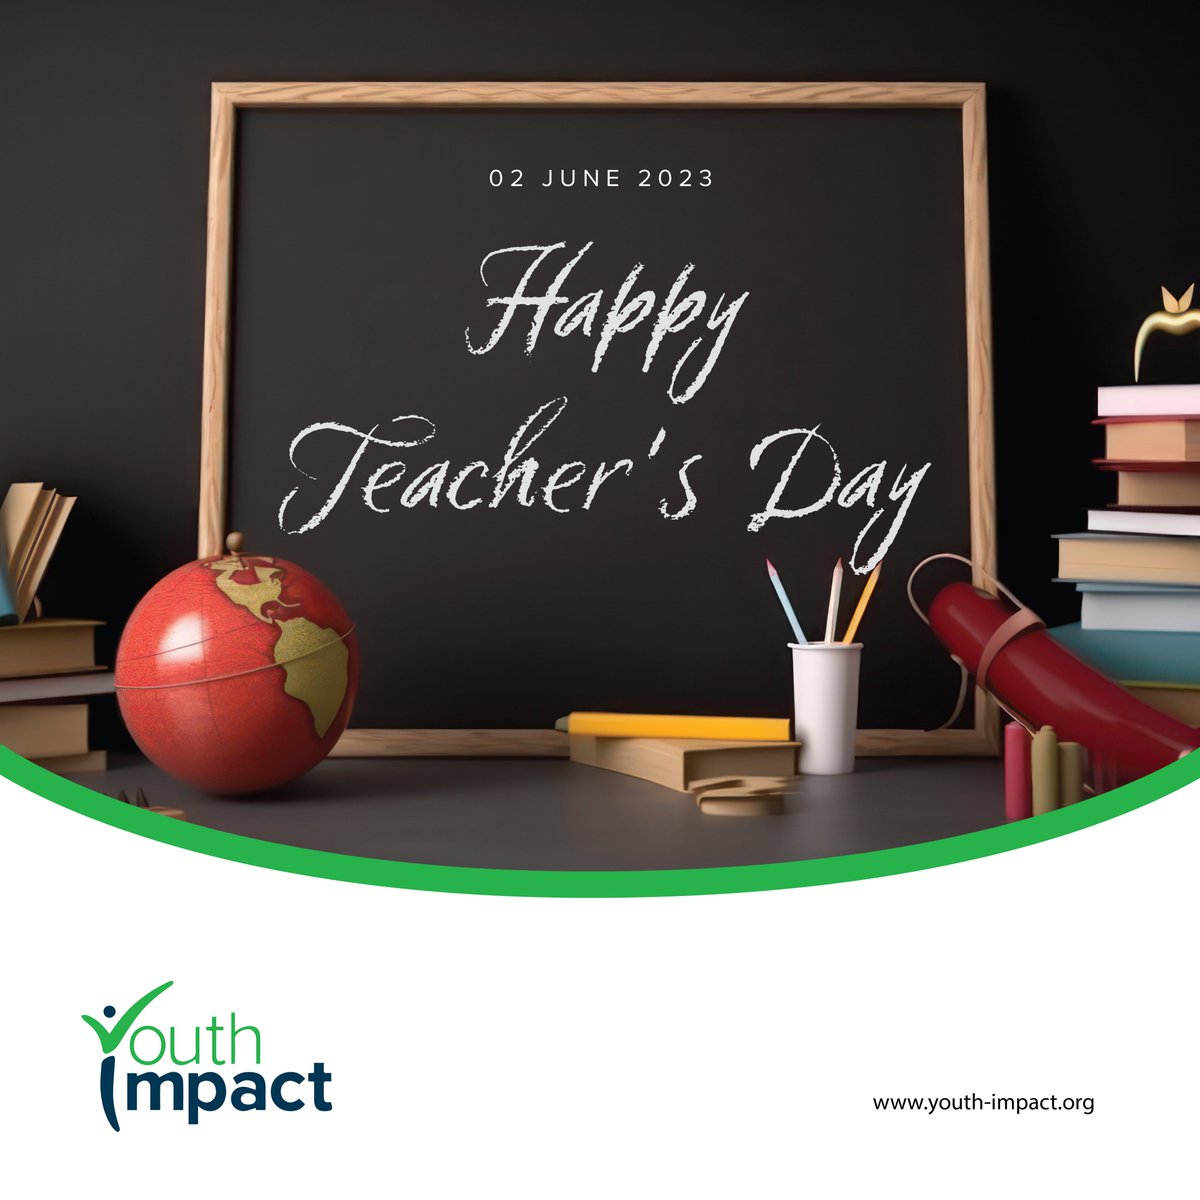 We thank school teachers, facilitators, our National Service Program participants, peer educators, and everyone else who teaches, mentors, and inspires our children. You are role models to all of us, and especially our children. Happy #TeachersDay!